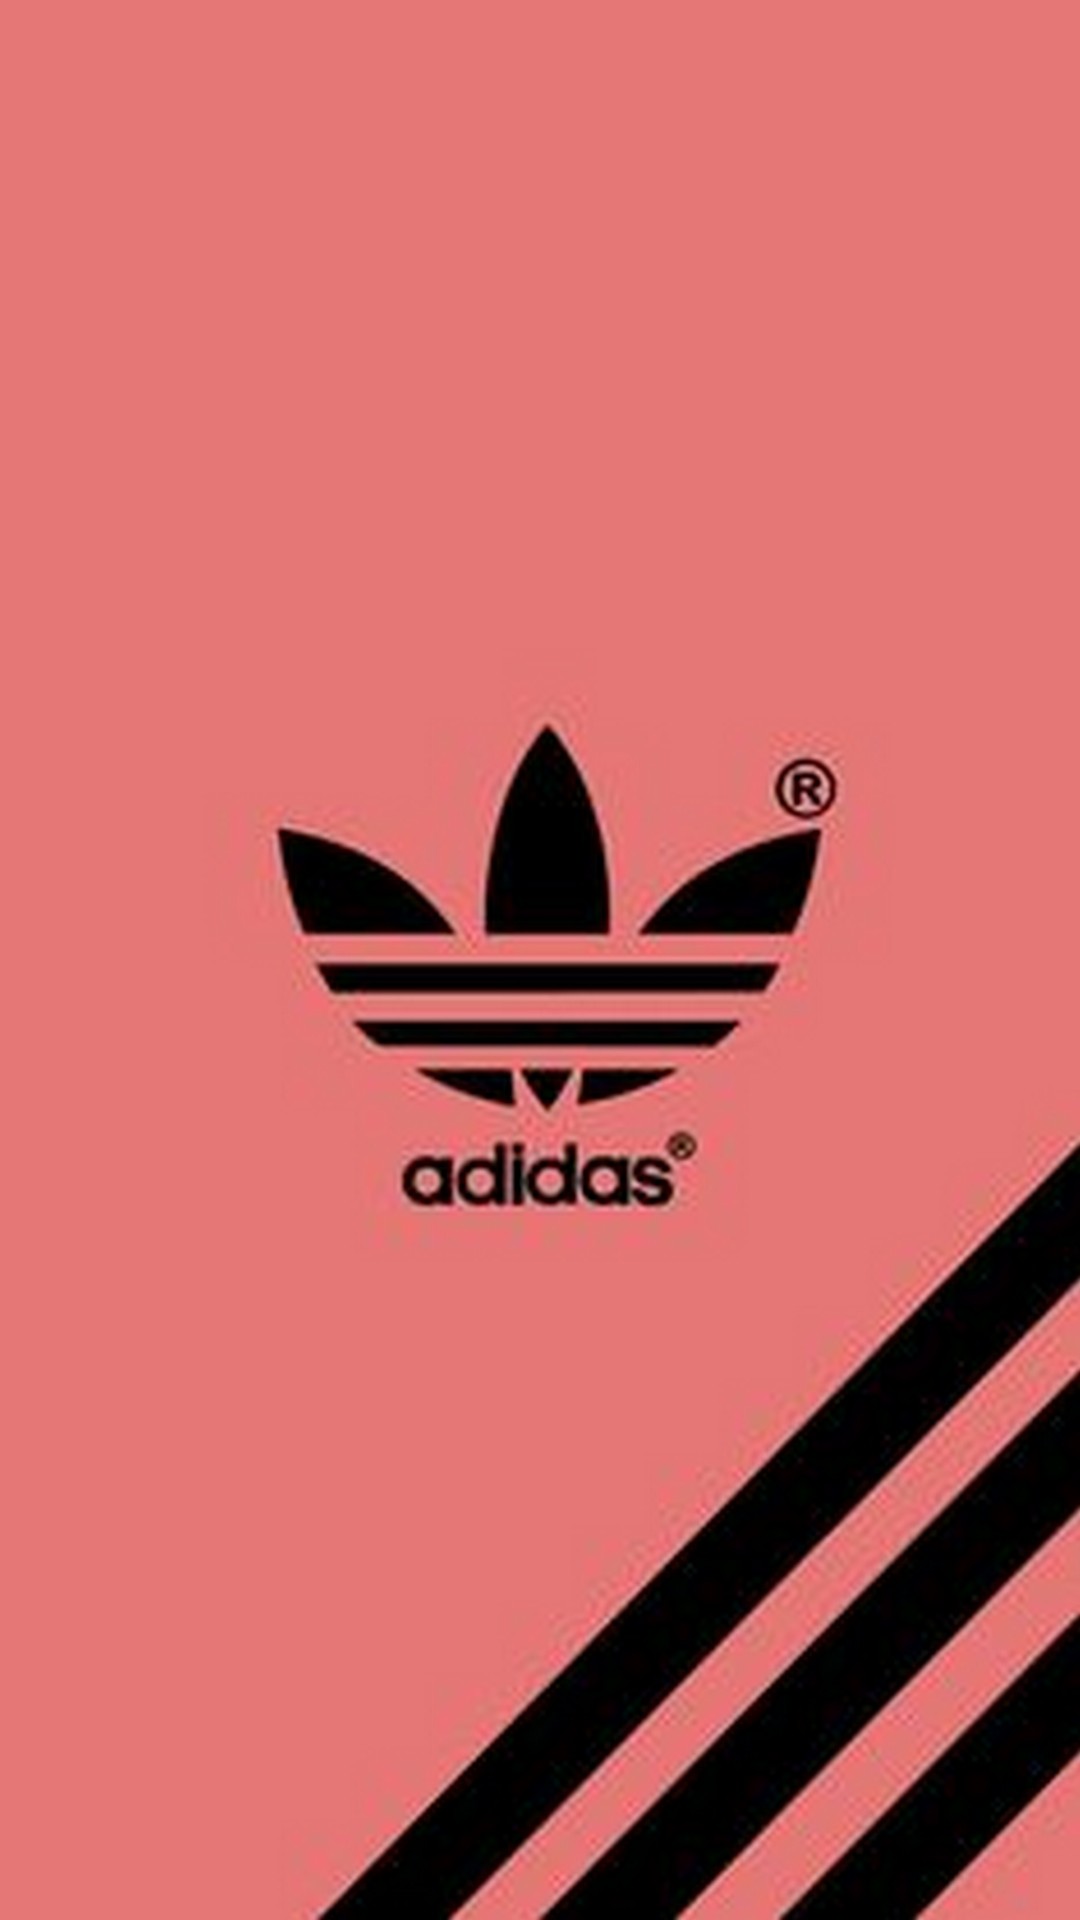 Adidas Iphone Wallpaper Hd With High Resolution Pixel Adidas Wallpaper Iphone X 1080x19 Wallpaper Teahub Io